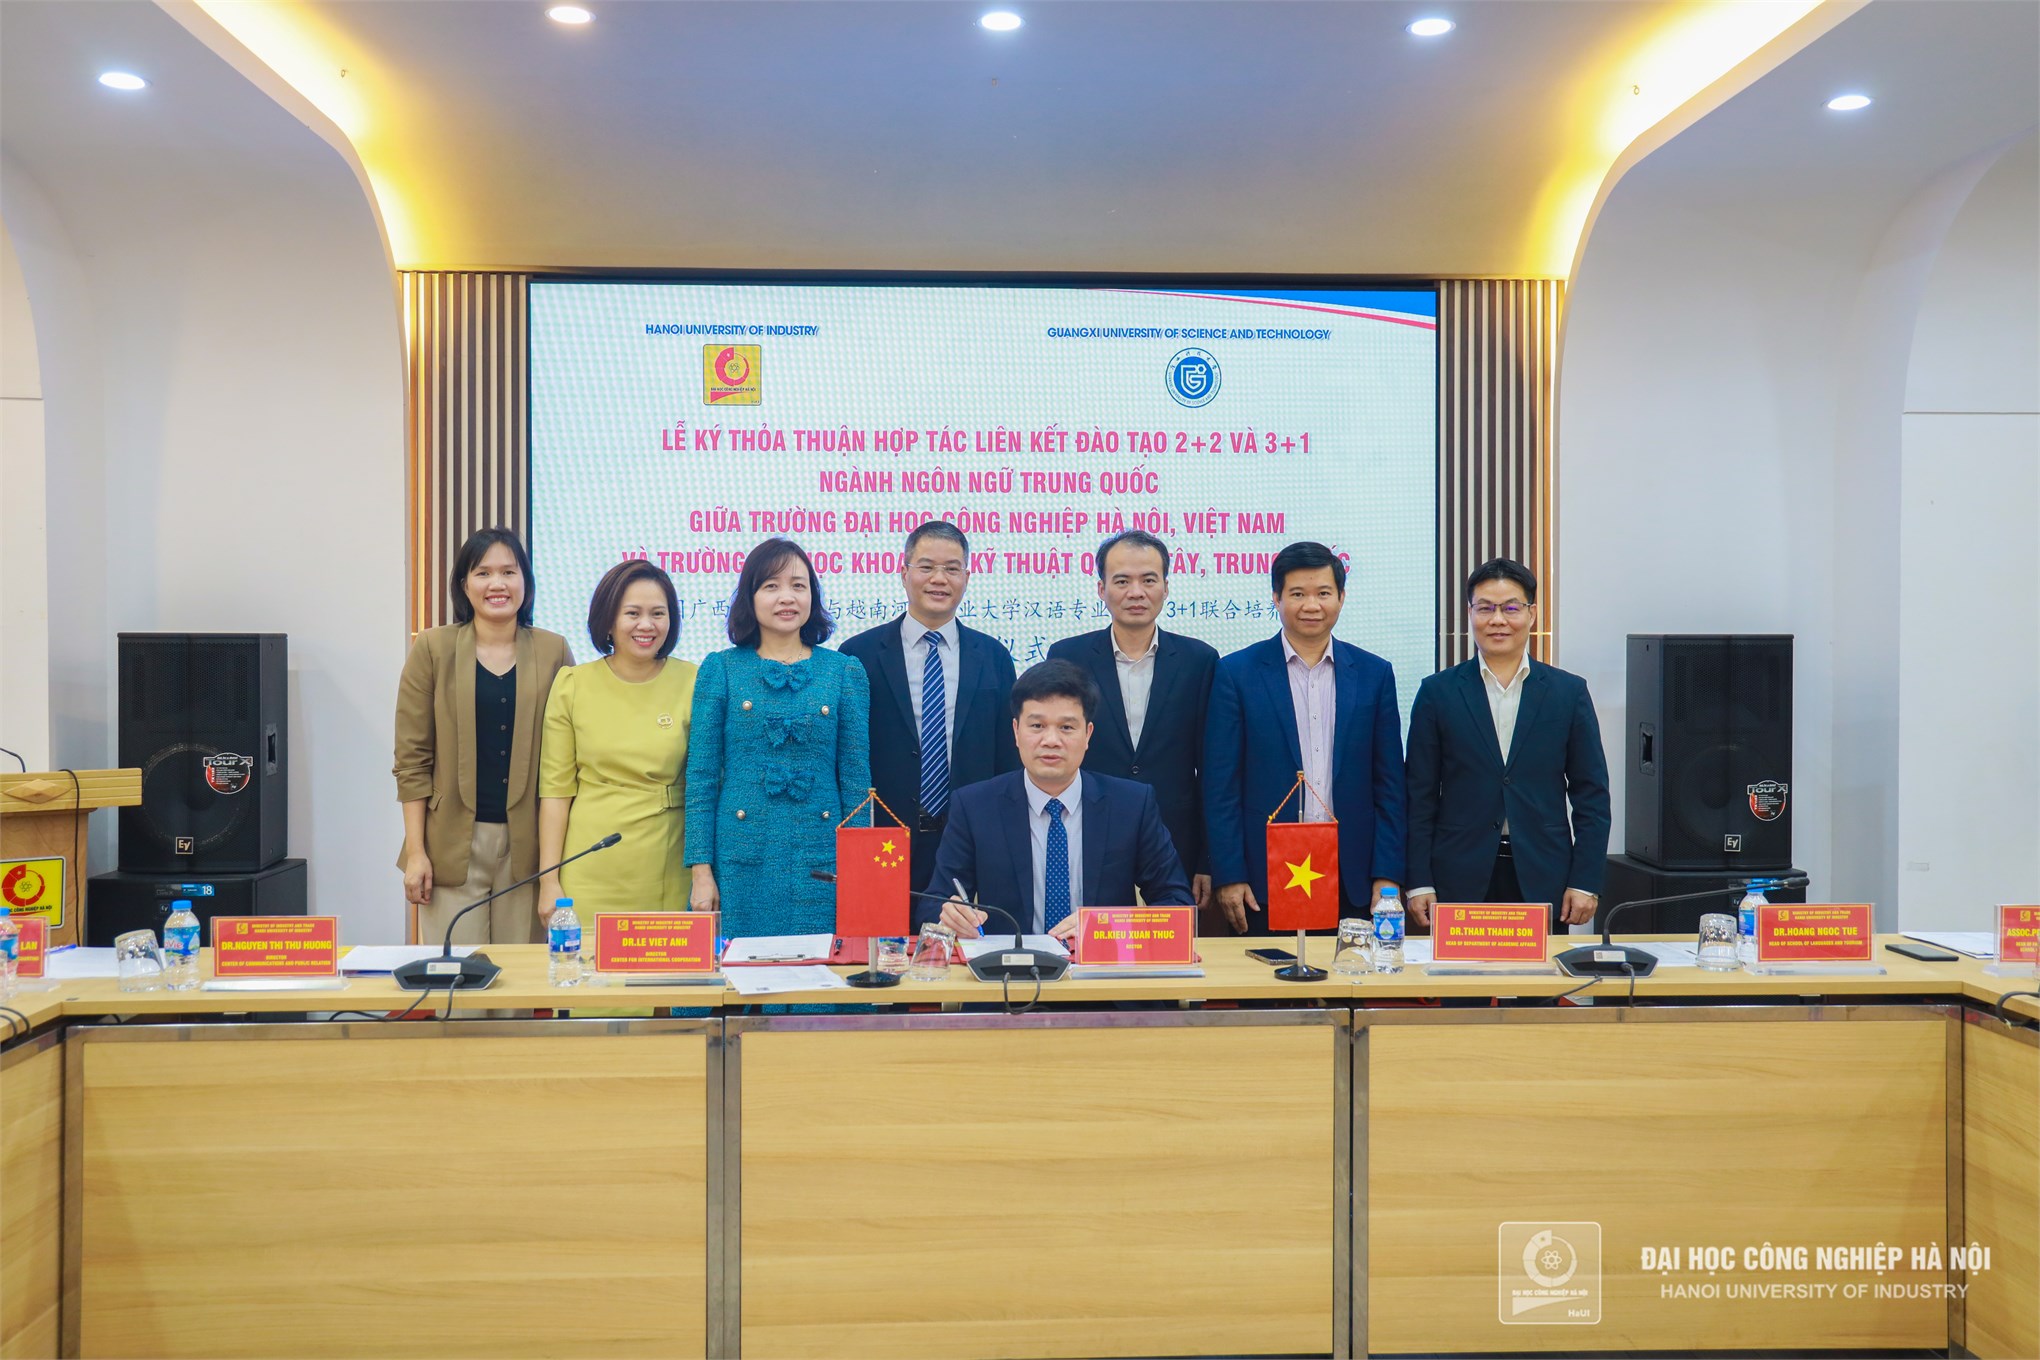 Hanoi University of Industry and Guangxi University of Science and Technology, China signed a cooperation agreement on training